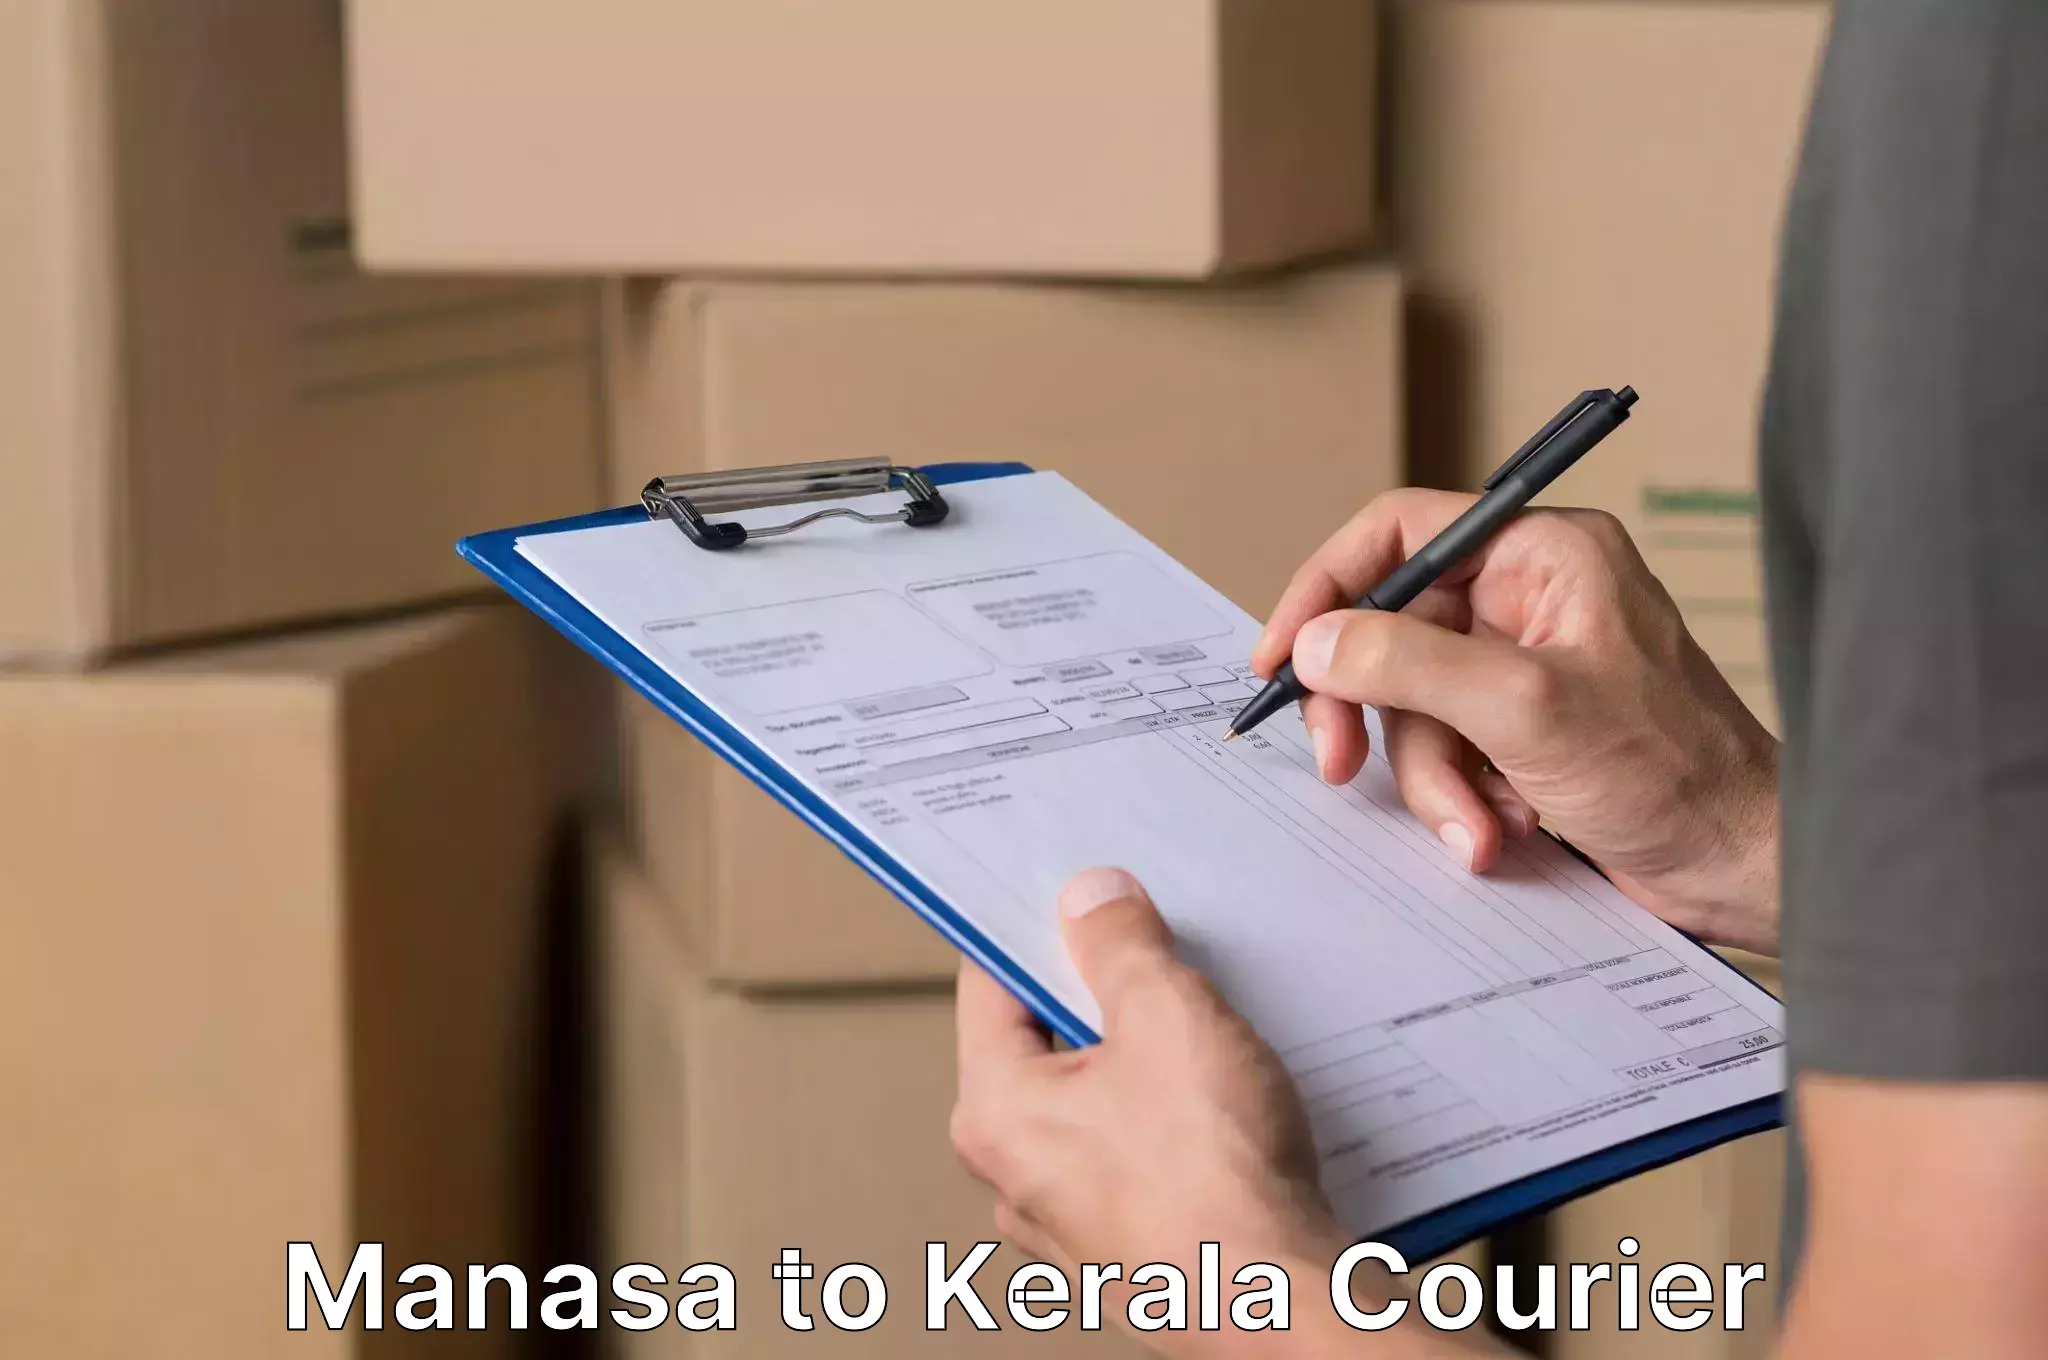 Quality relocation services Manasa to Cochin University of Science and Technology